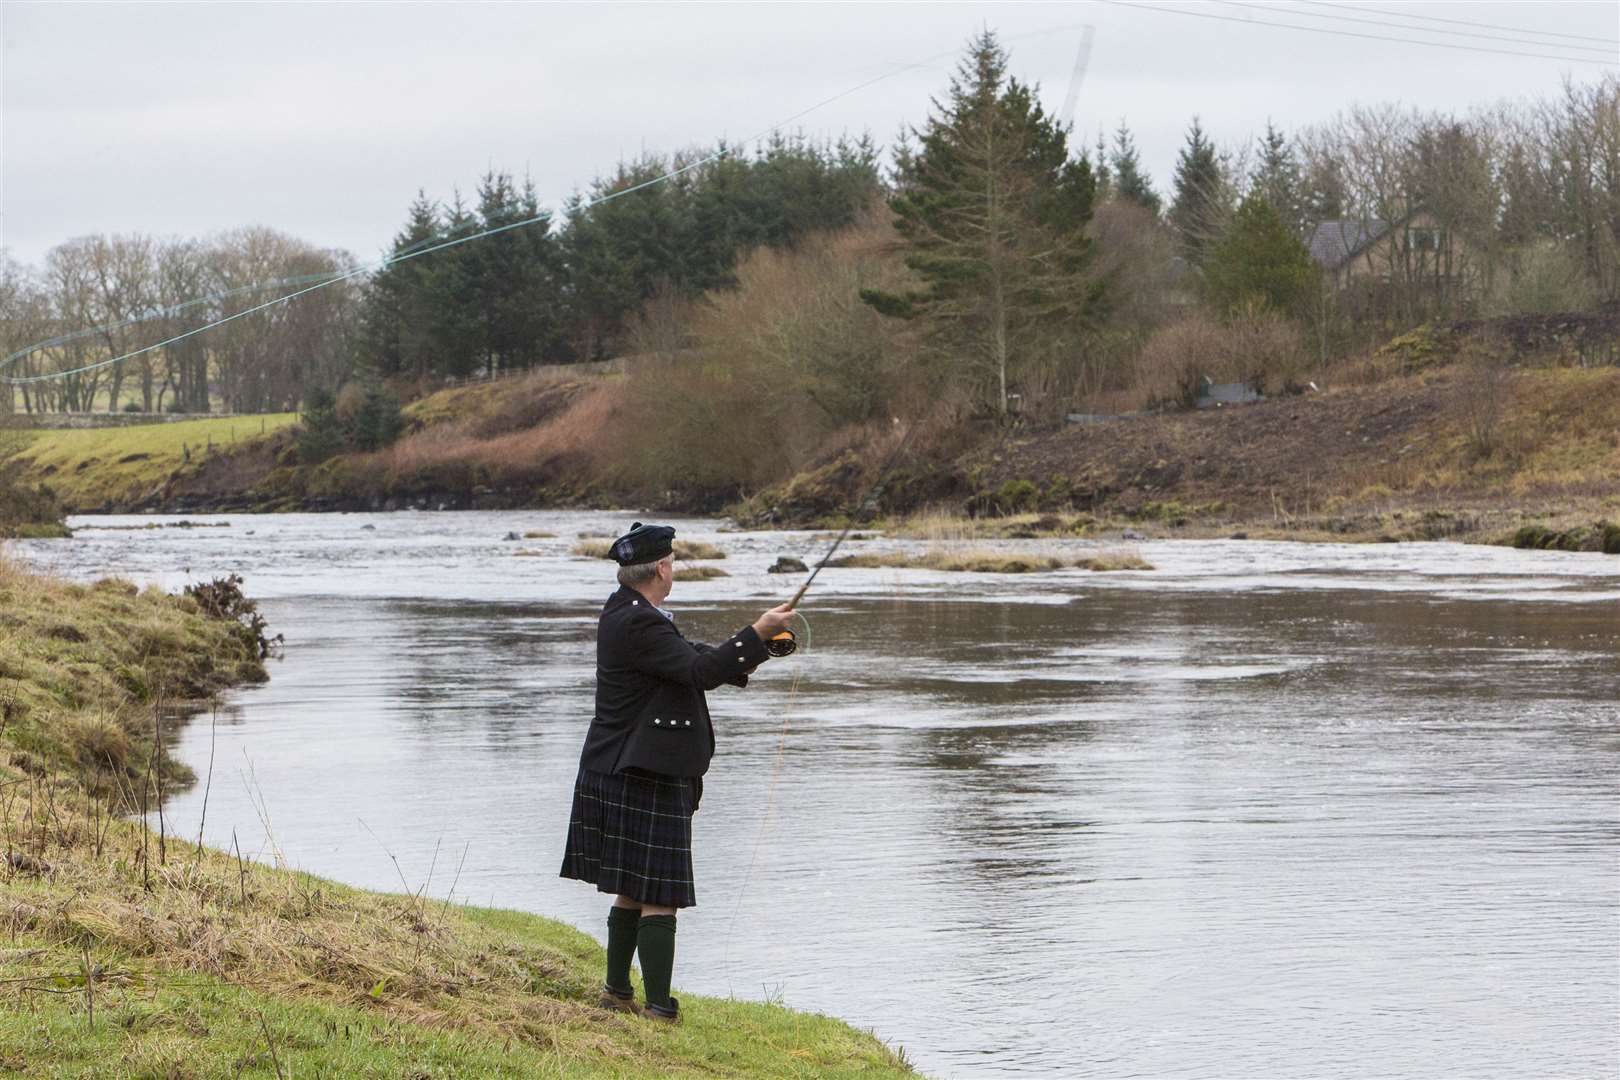 Official duties done after casting the first fly of the season, John Graham had a few casts further along the riverbank. Picture: Robert MacDonald / Northern Studios